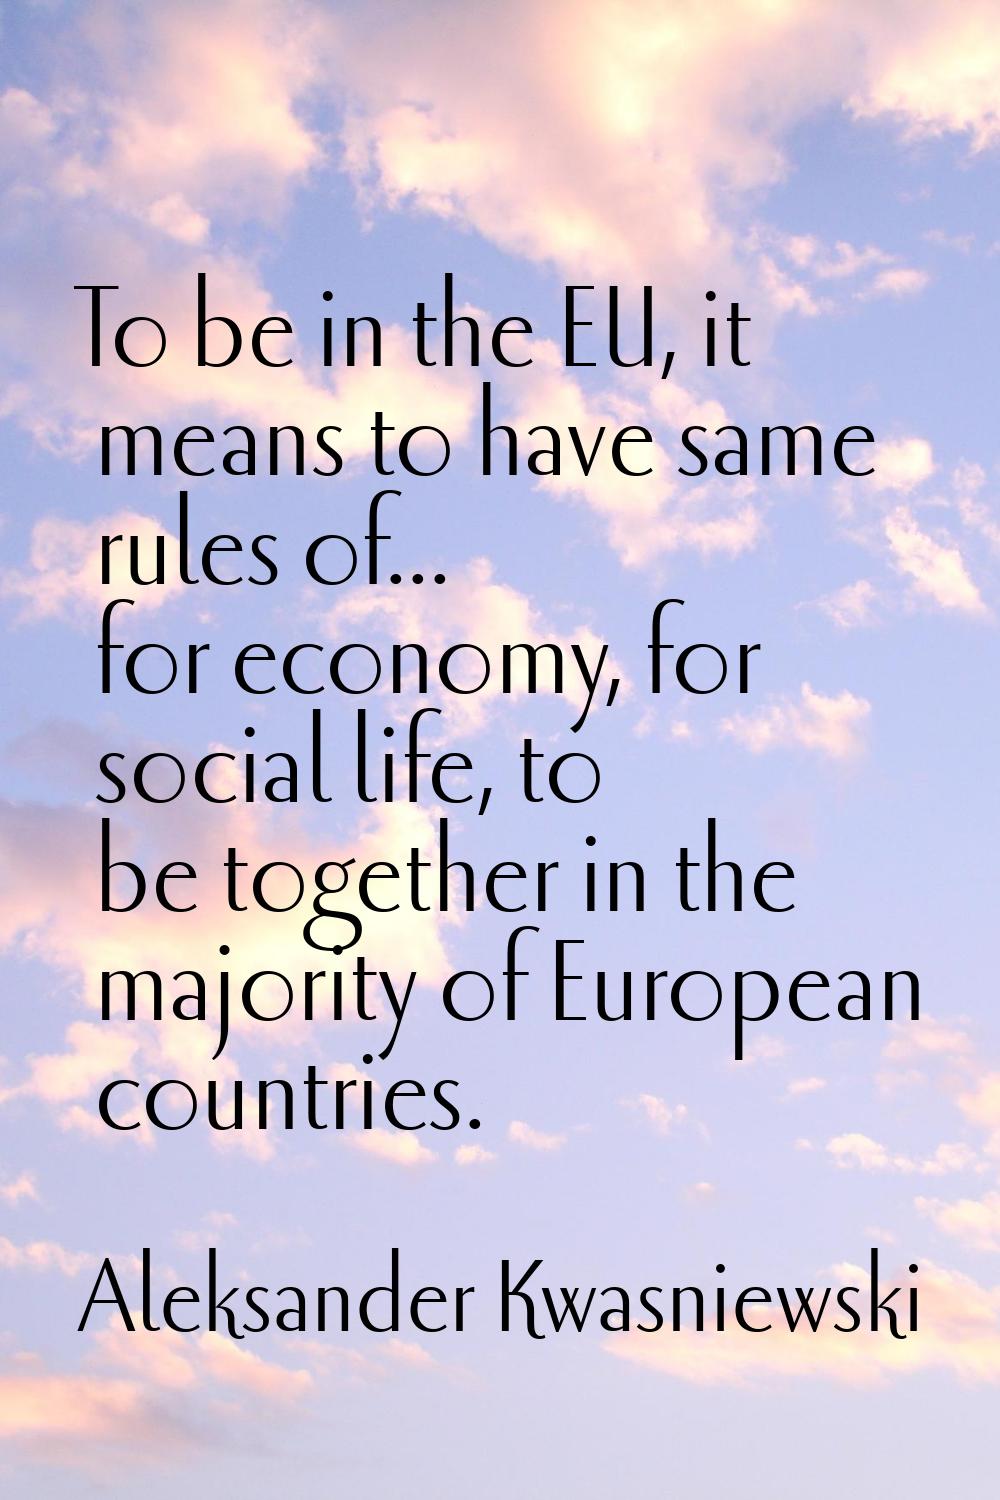 To be in the EU, it means to have same rules of... for economy, for social life, to be together in 